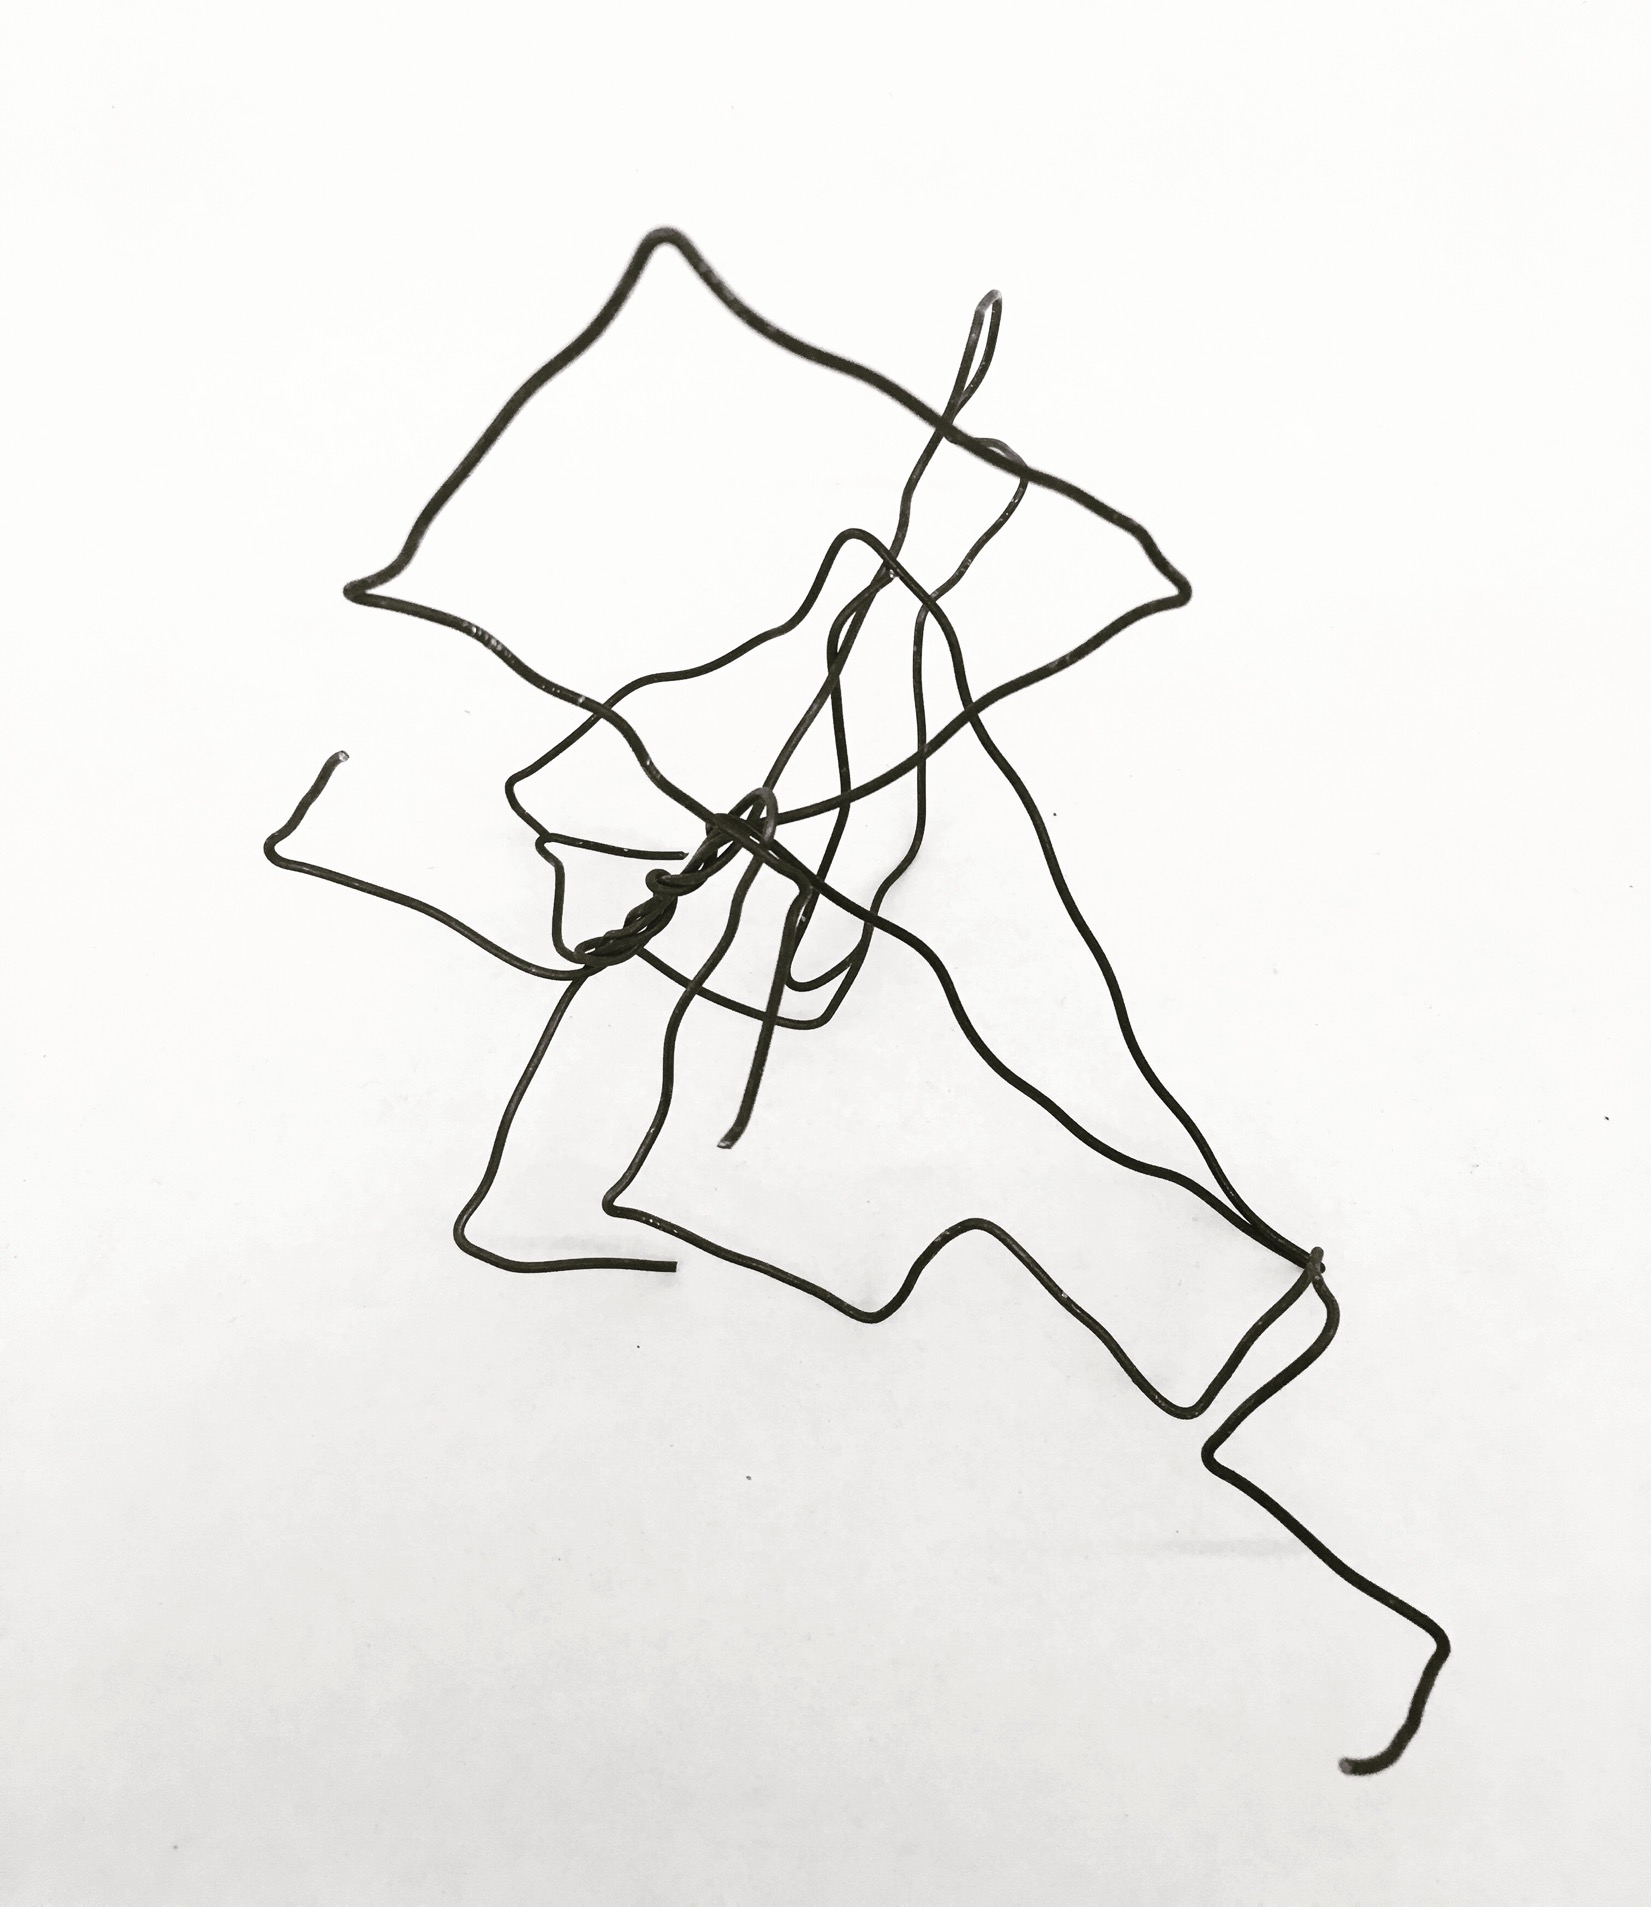 Wire Sculpture Using Geometric Lines and Forms